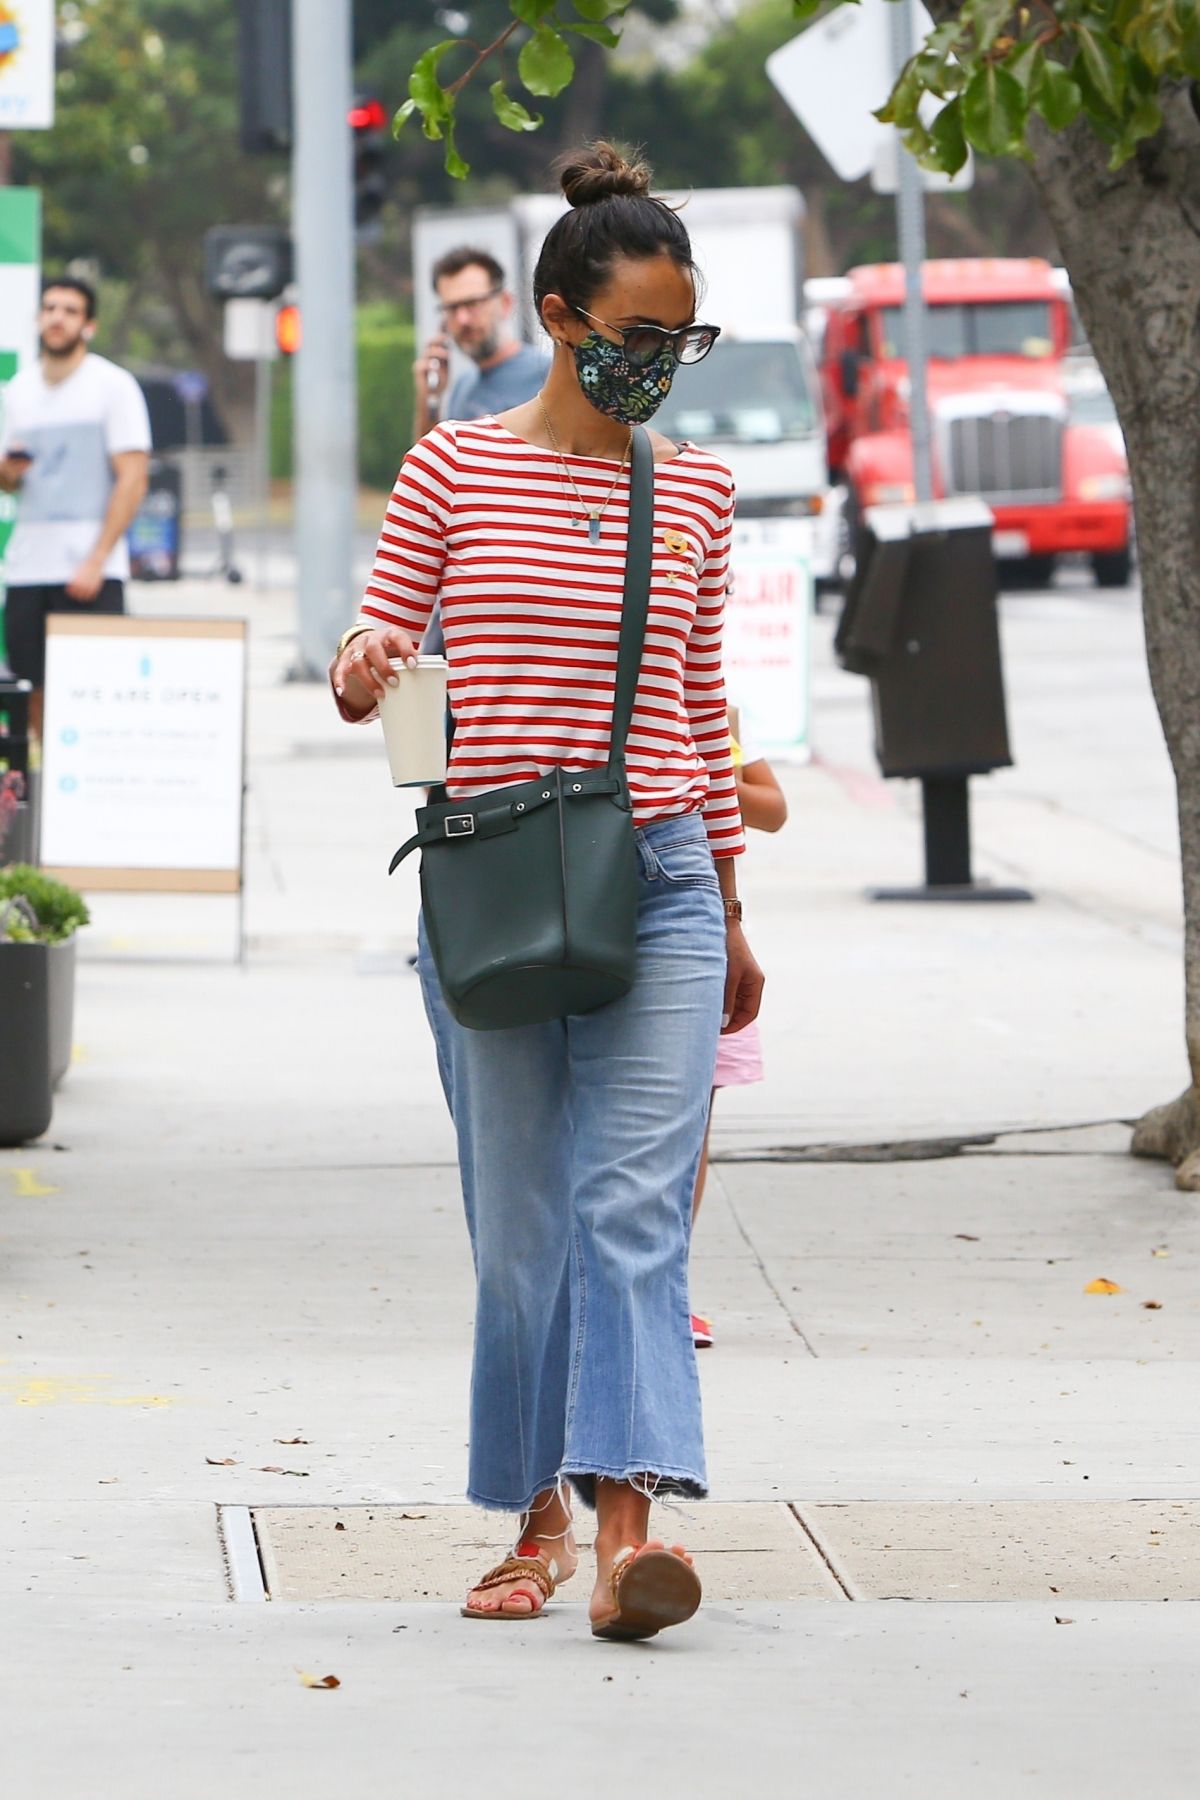 JORDANA BREWSTER Out with Her Dog in Brentwood 06/25/2020 – HawtCelebs